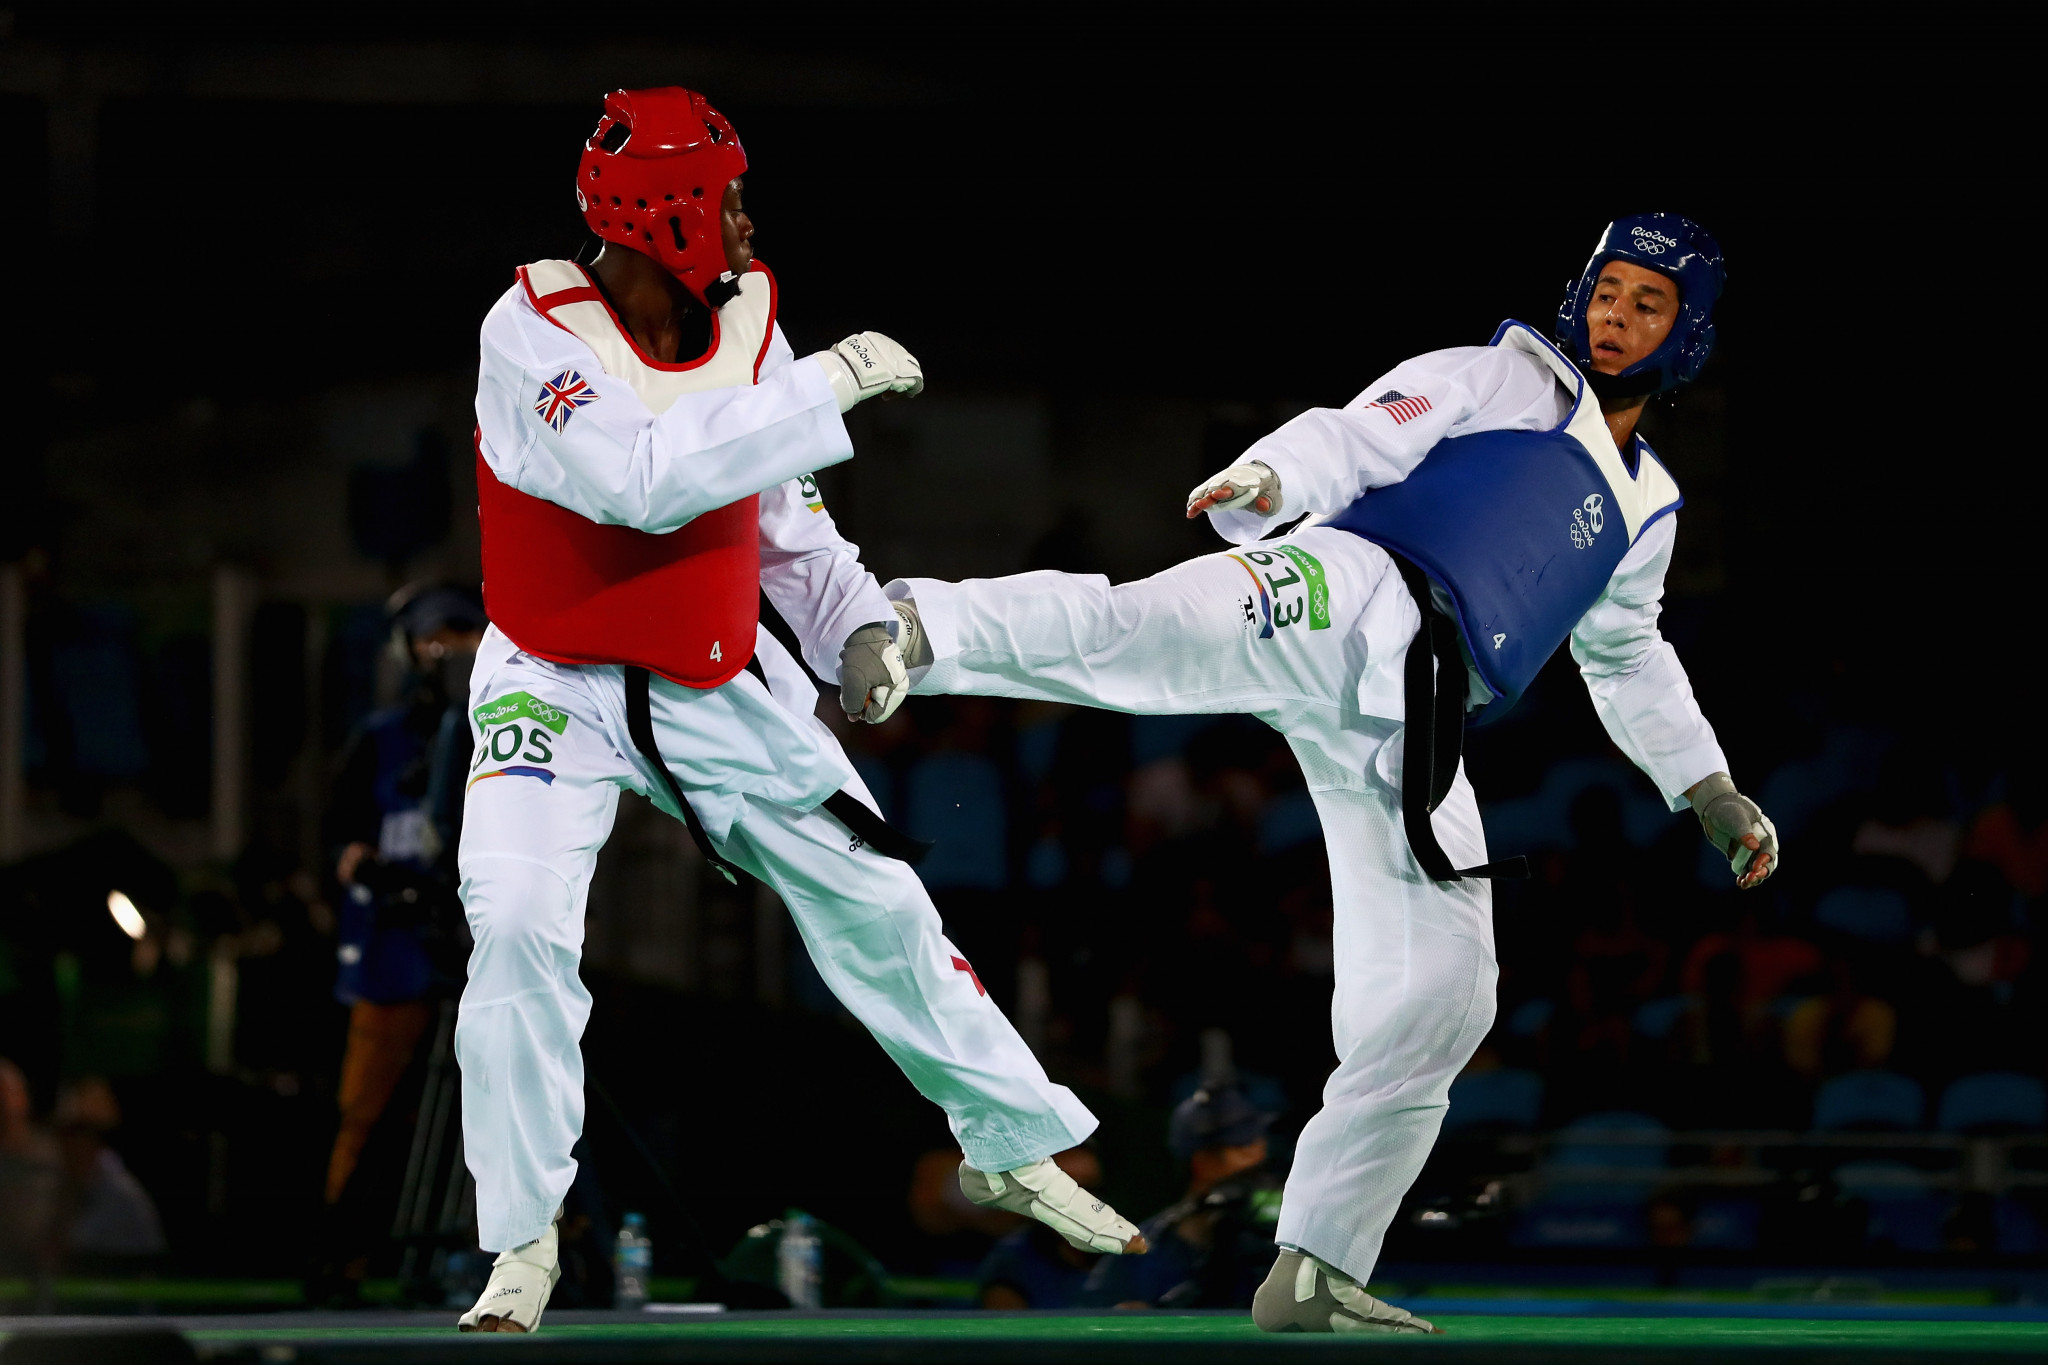 Taekwondo is not listed as either a compulsory or optional sport for the Commonwealth Games ©Getty Images